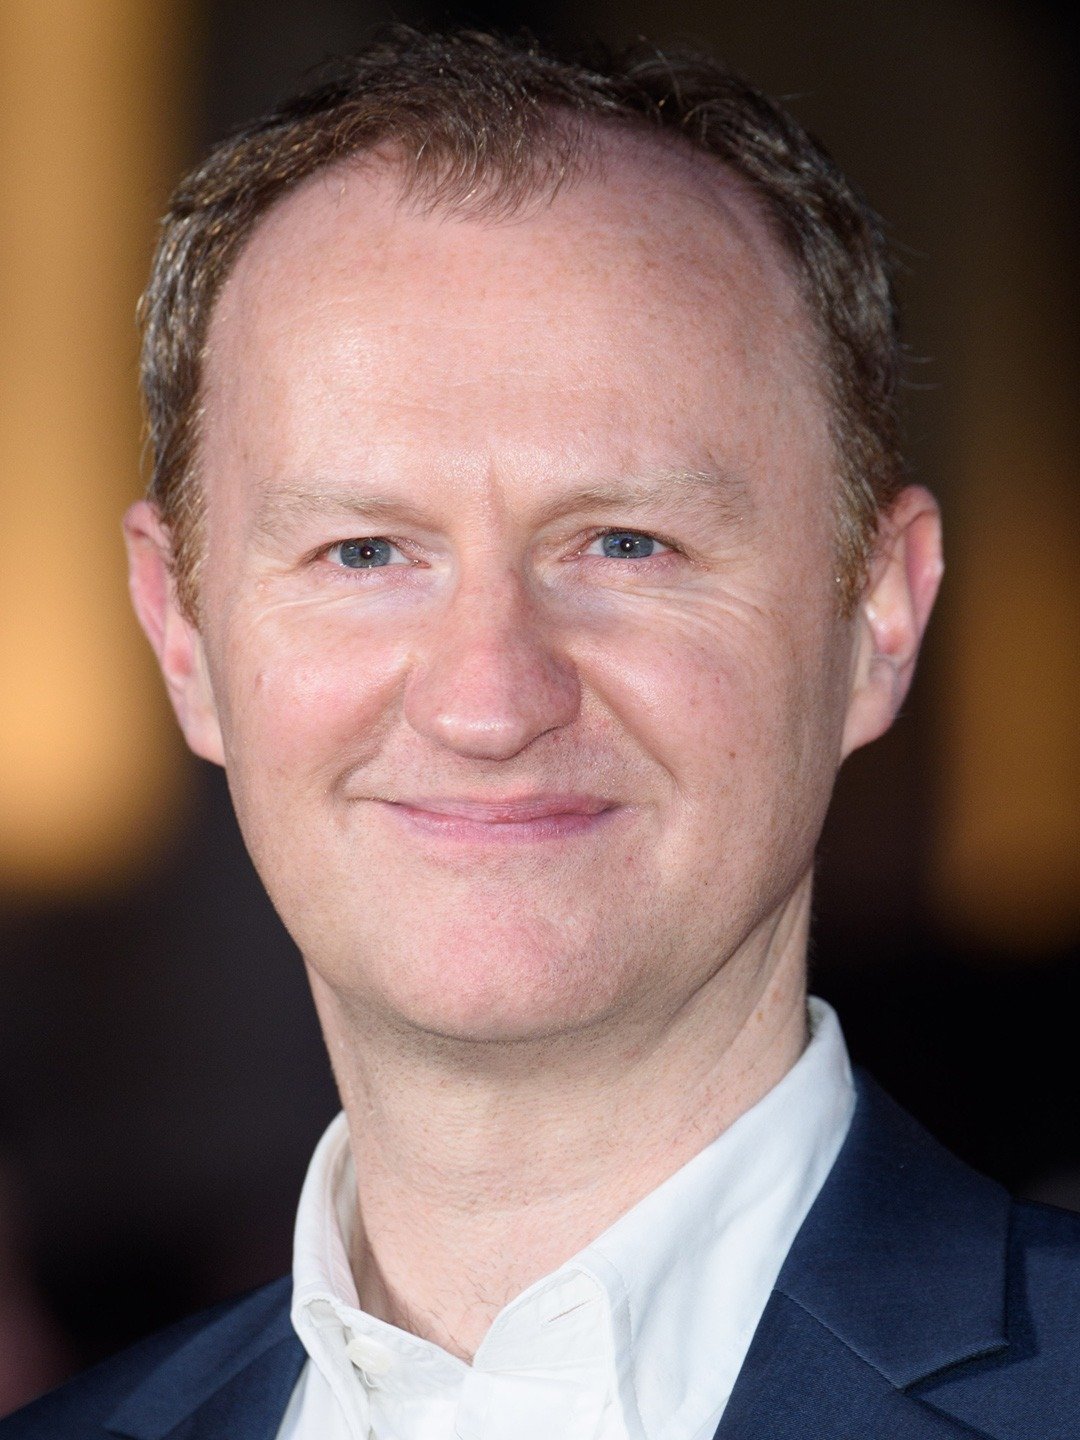 How tall is Mark Gatiss?